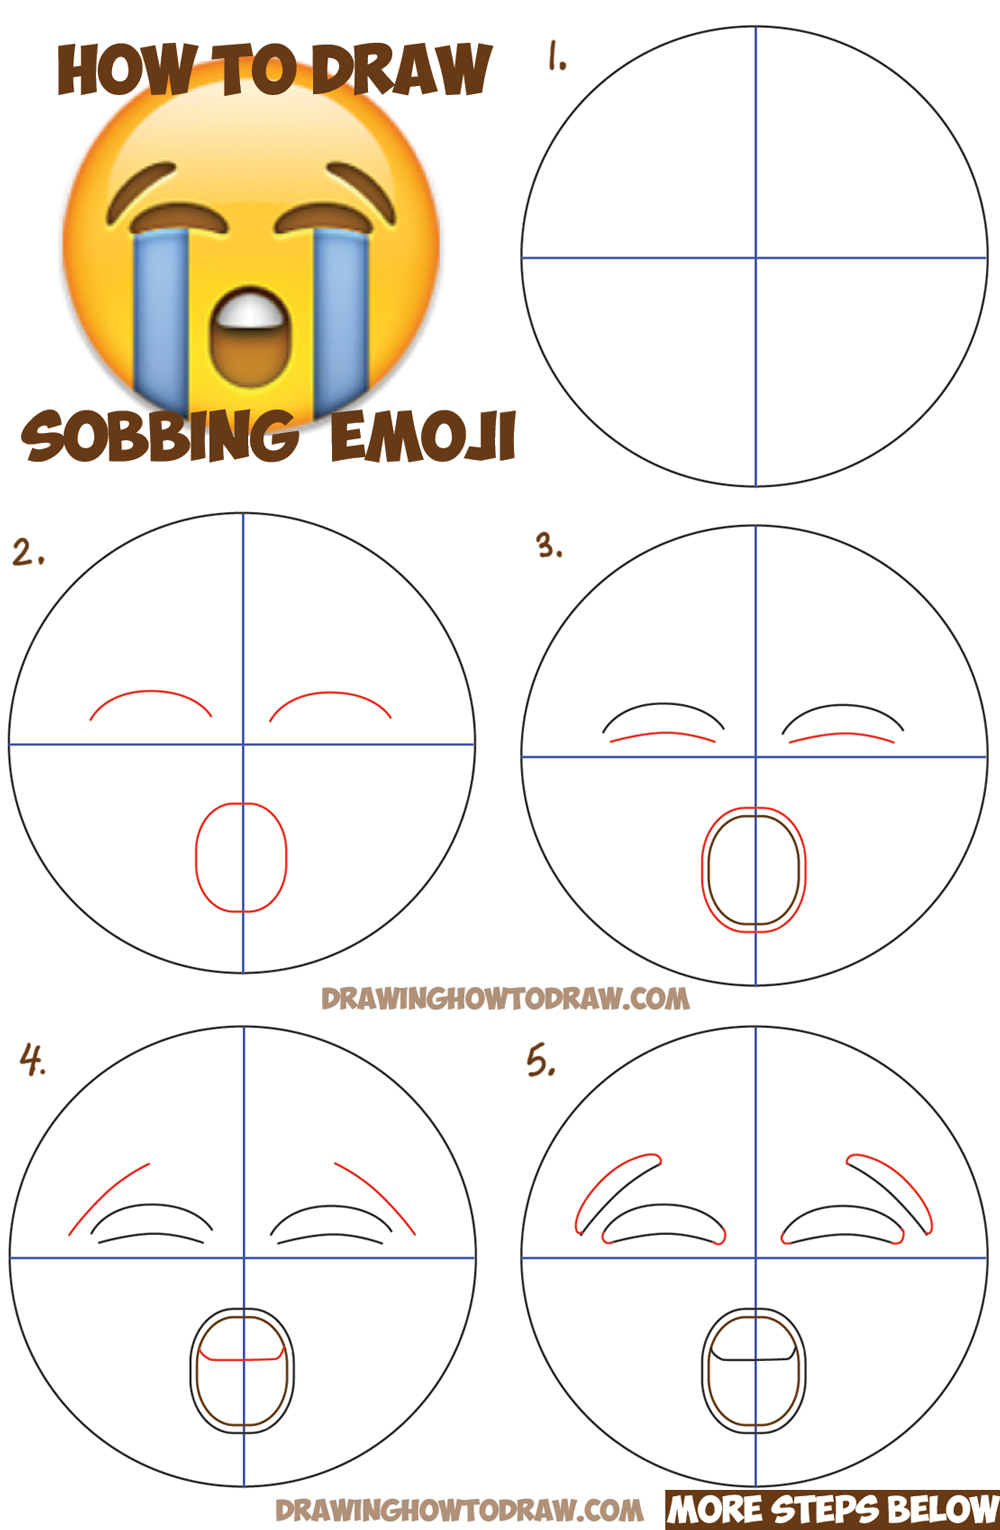 How to Draw Sobbing Crying Emoji Face with Easy Steps Lesson - How to ...